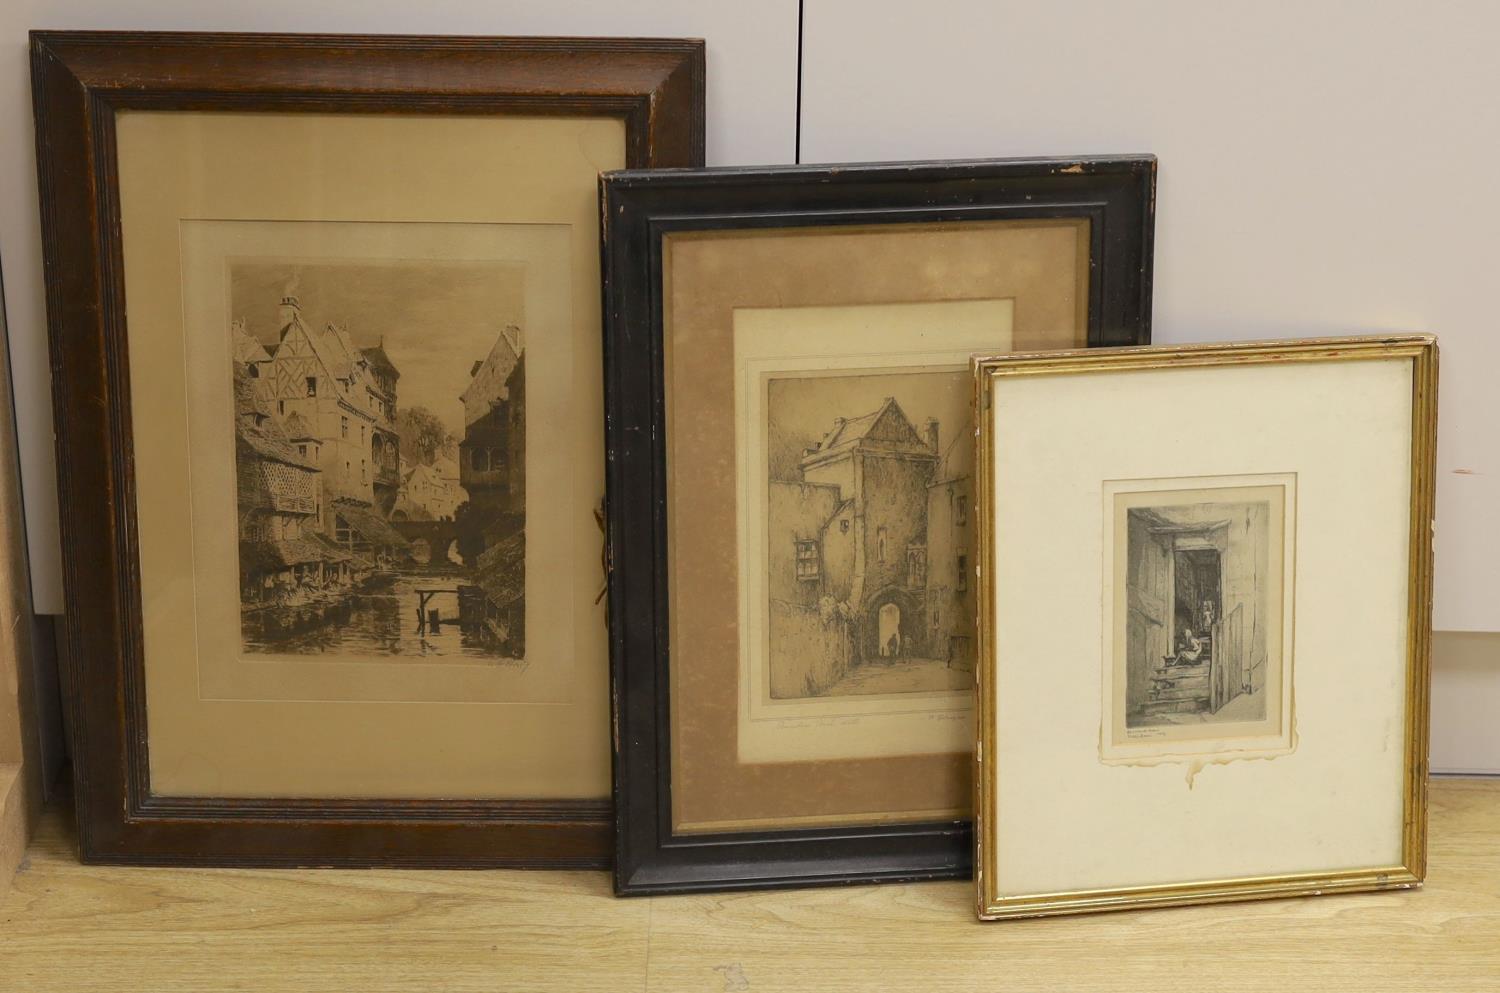 Three assorted etching by A.H. Hague, S. Green and F. Robson, largest 26 x 18cm